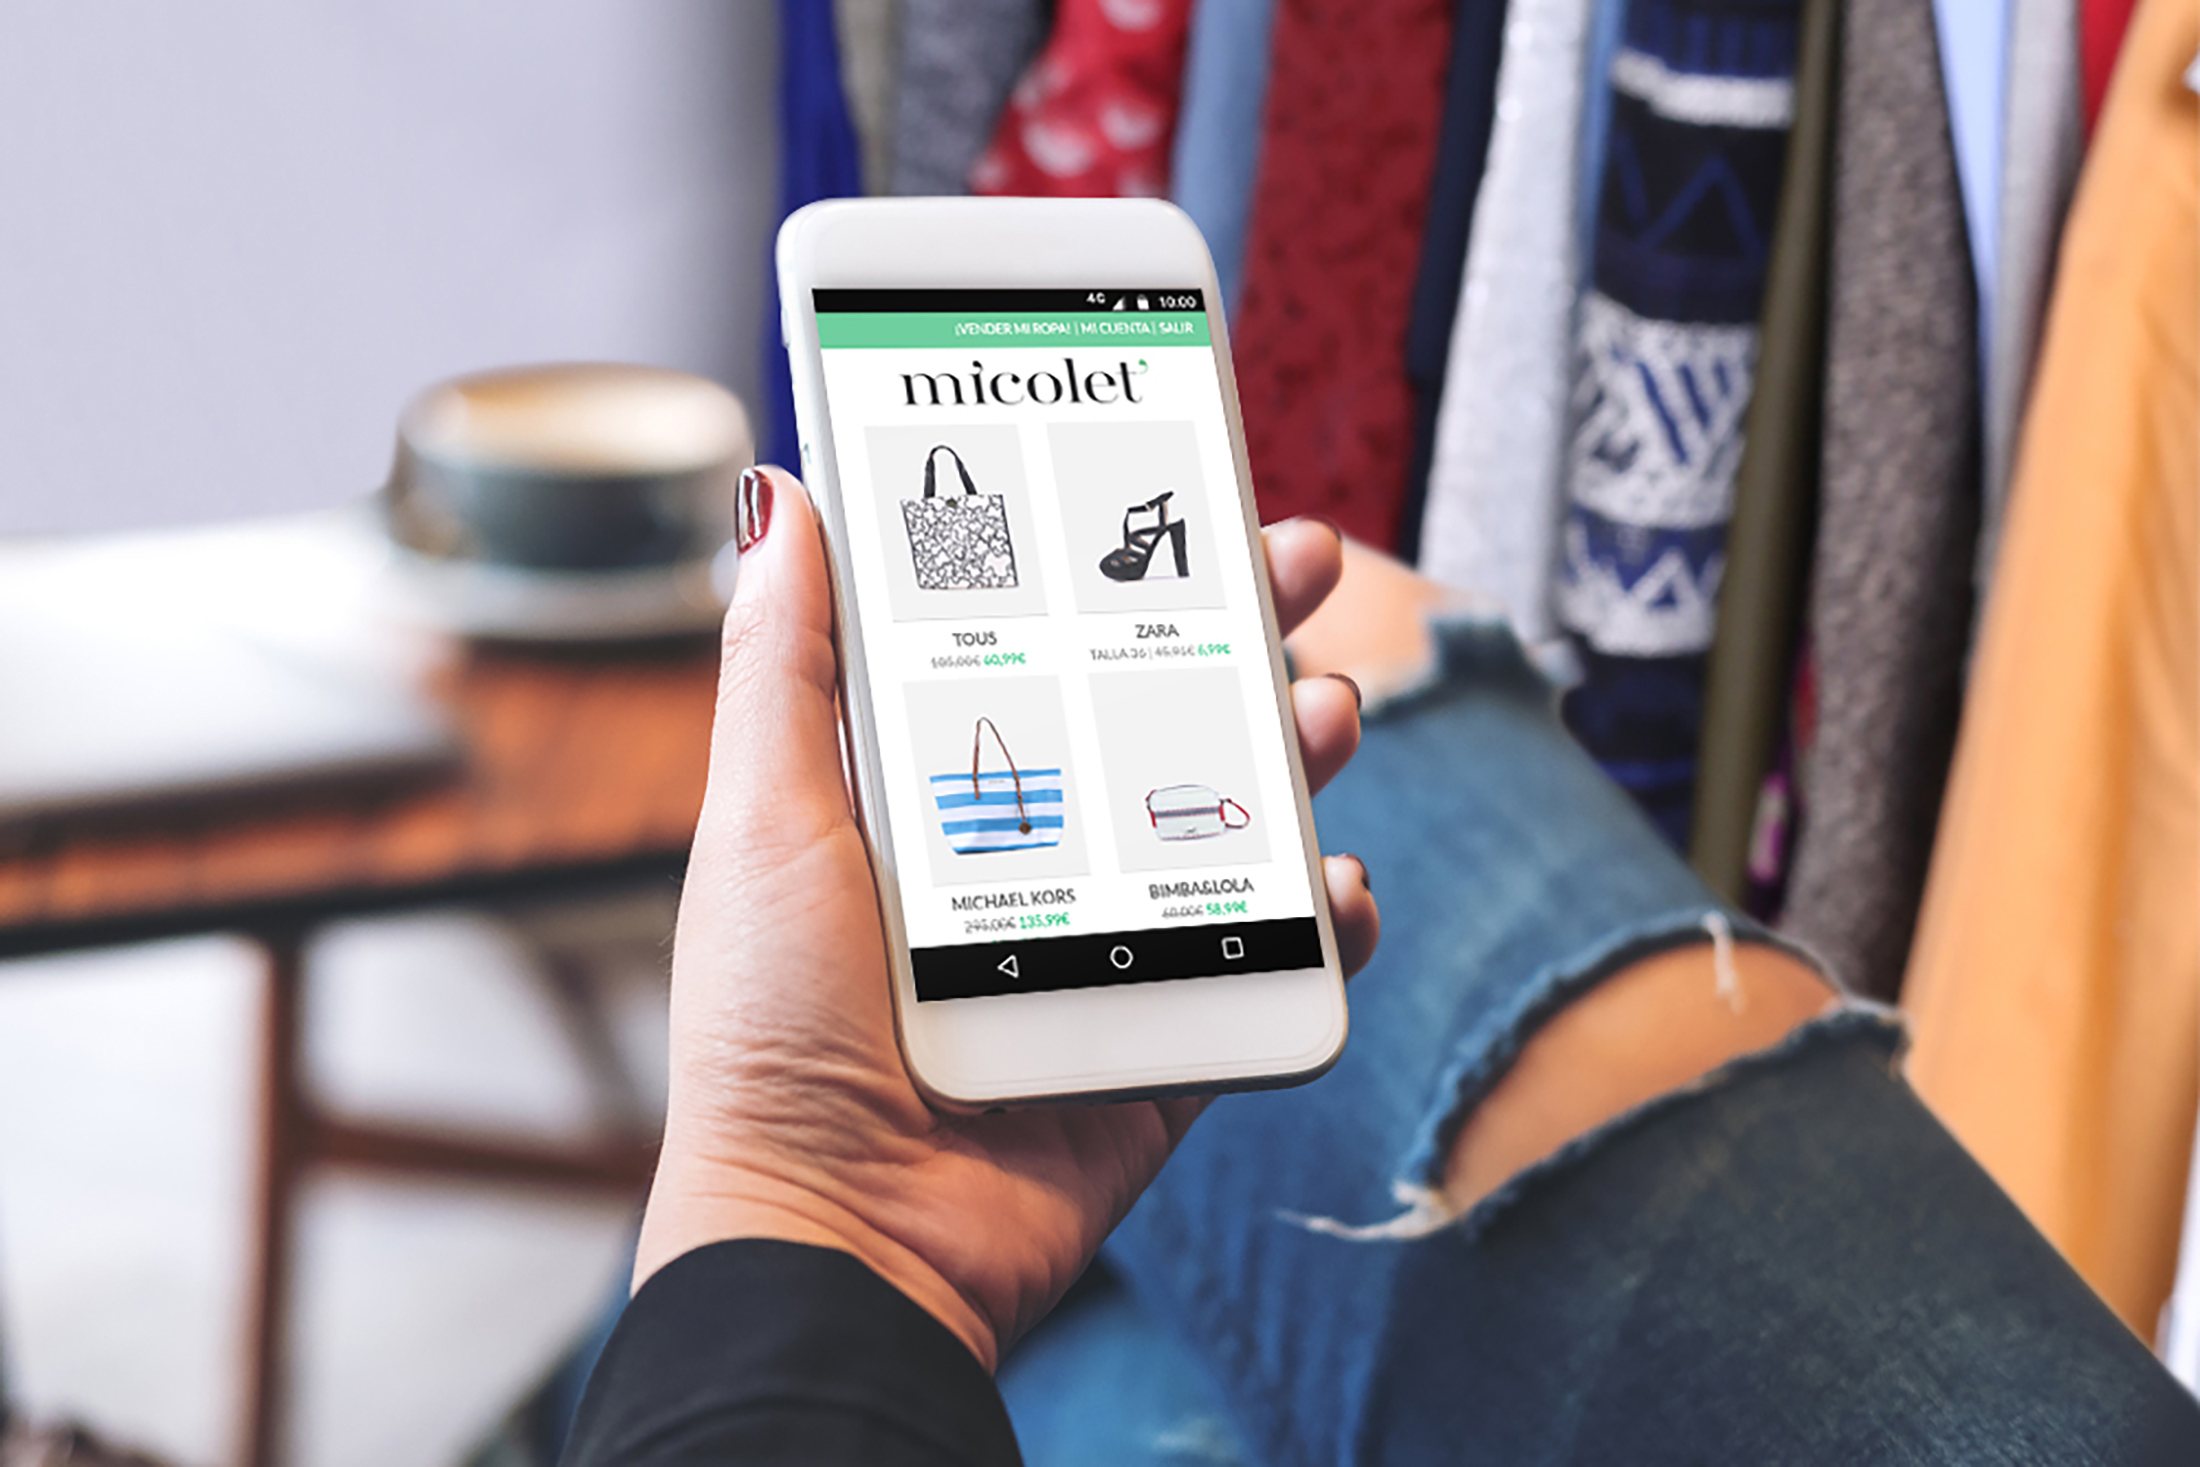 Fashion Resale Marketplace Micolet Credits Success to Quality